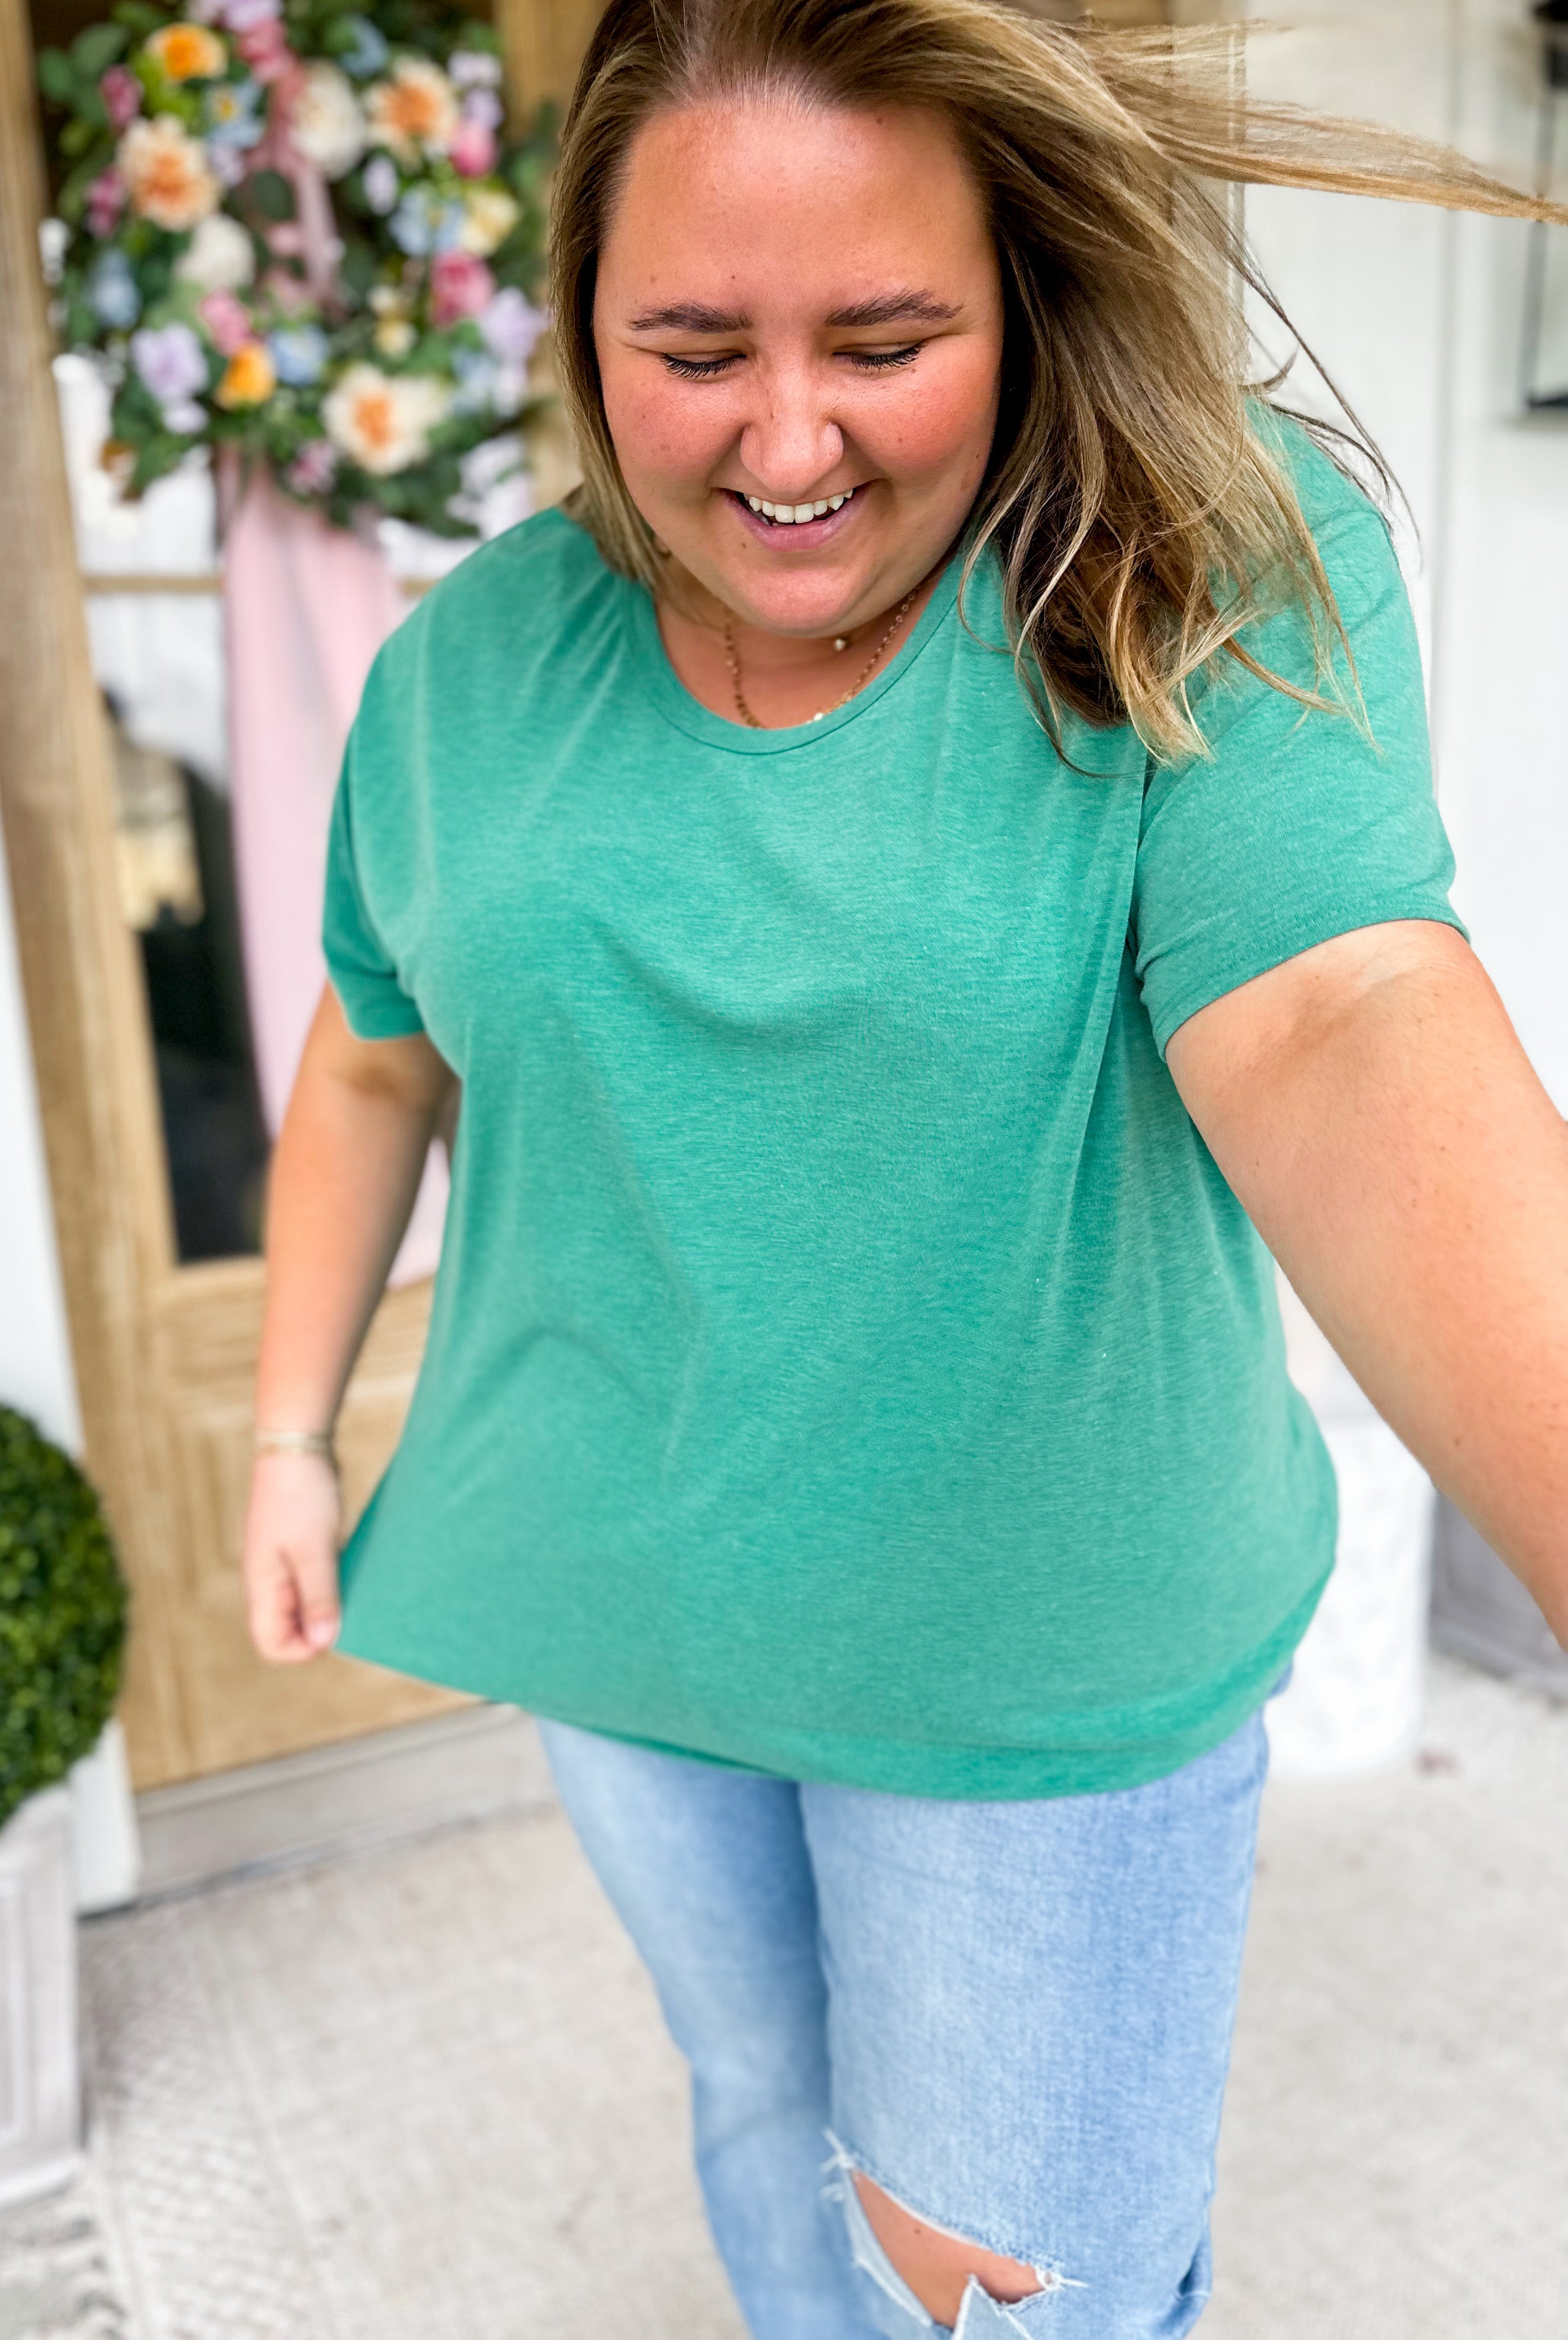 Chris Easy Wear Round Neck Short Sleeve Top - Be You Boutique